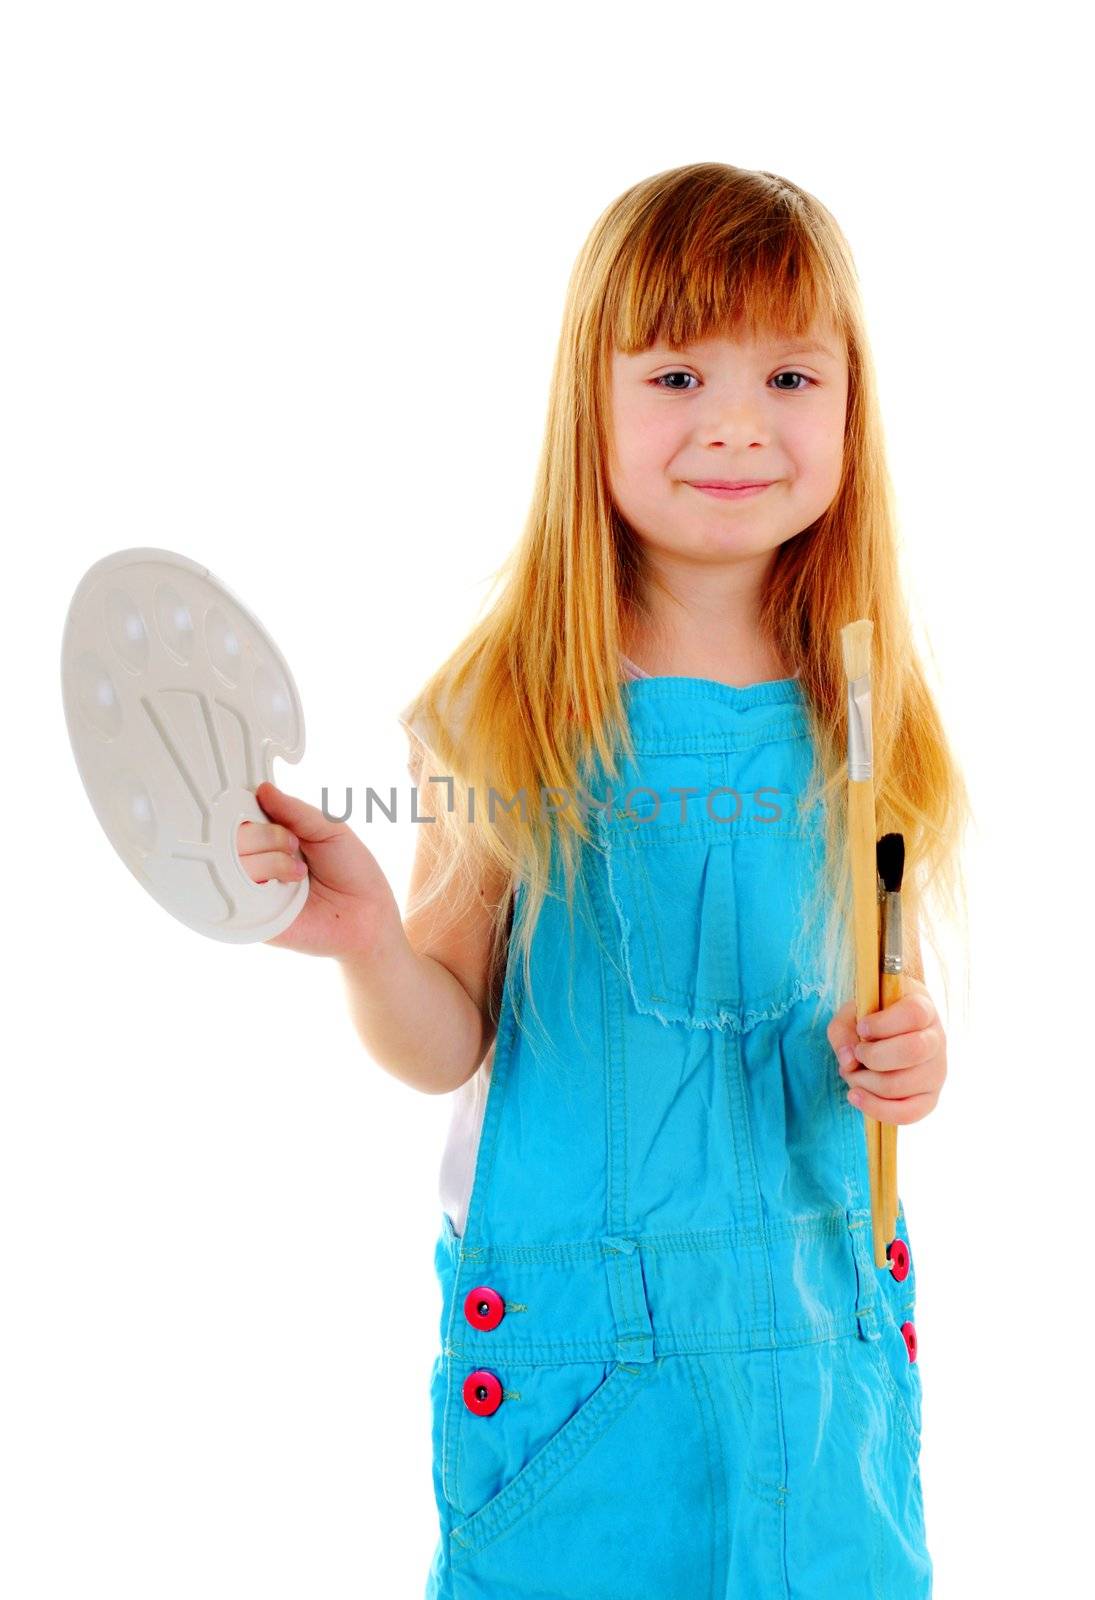 Small girl with brushes and palette on white background